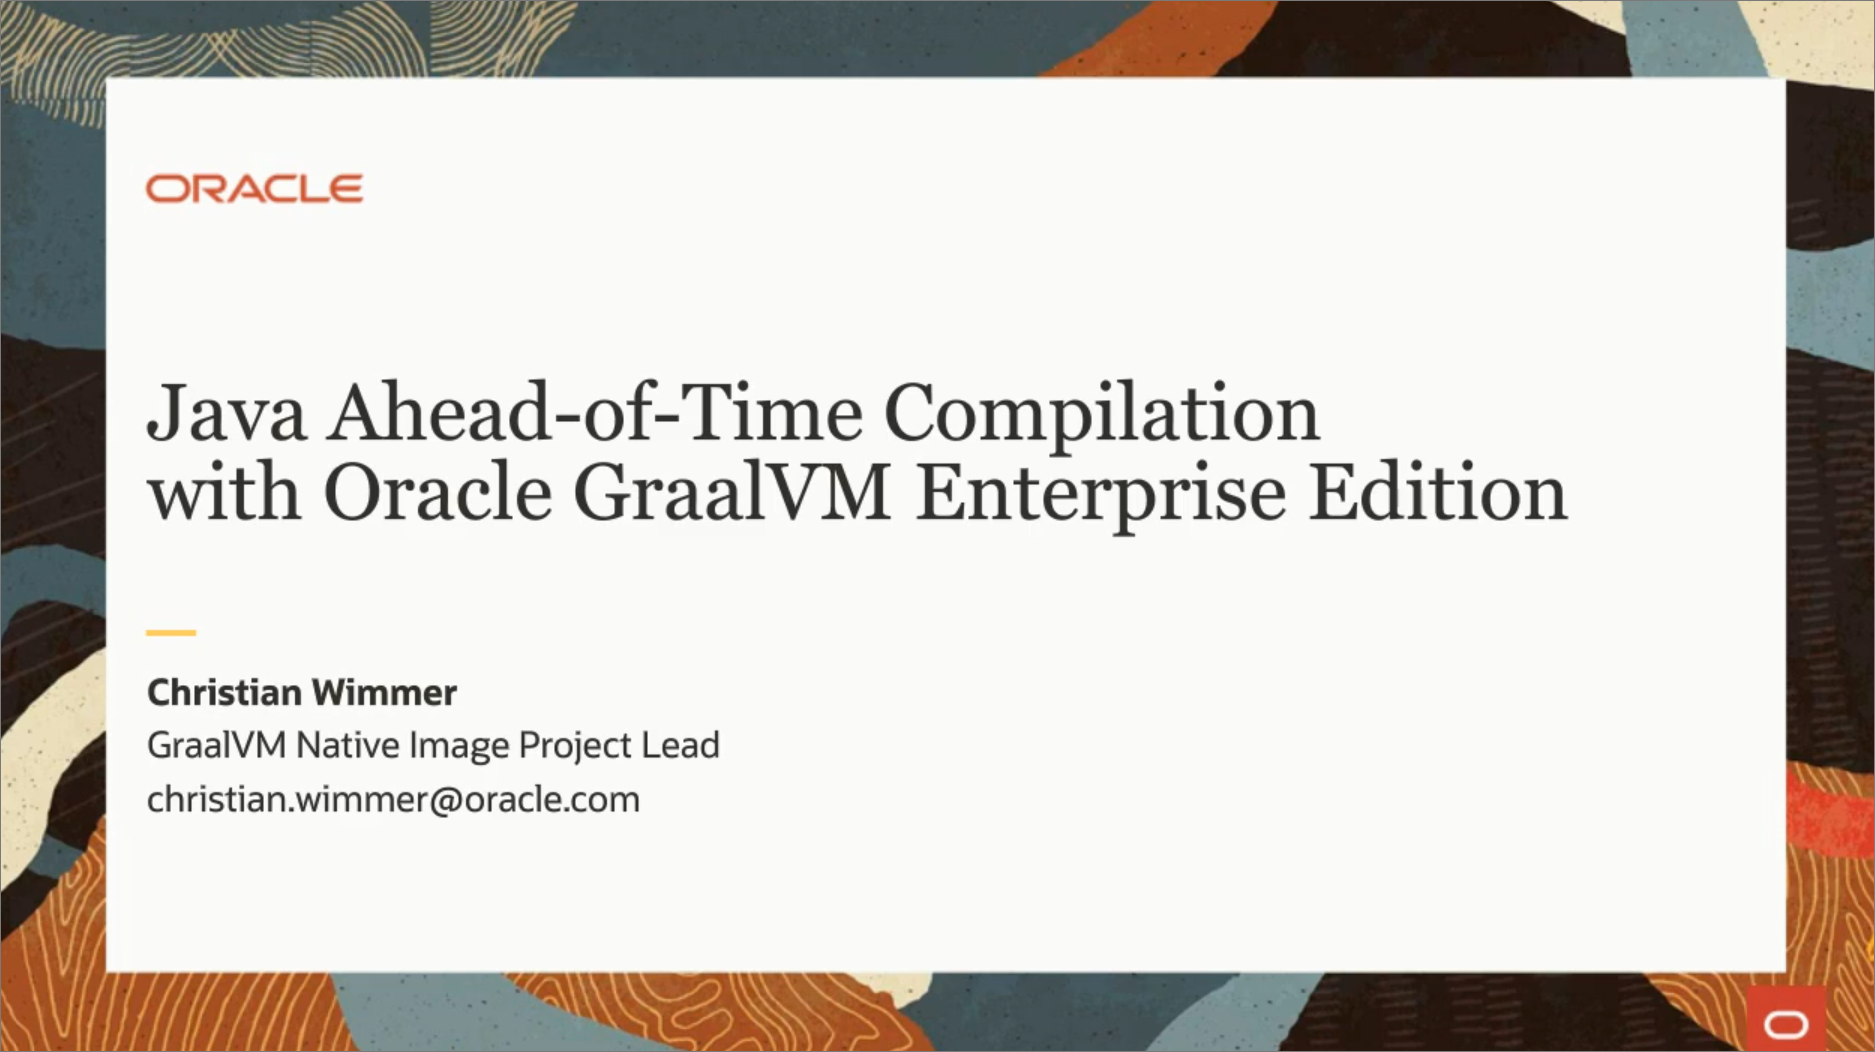 java ahead of time compilation with oracle graalvm - Java Ahead-of-Time Compilation with Oracle GraalVM